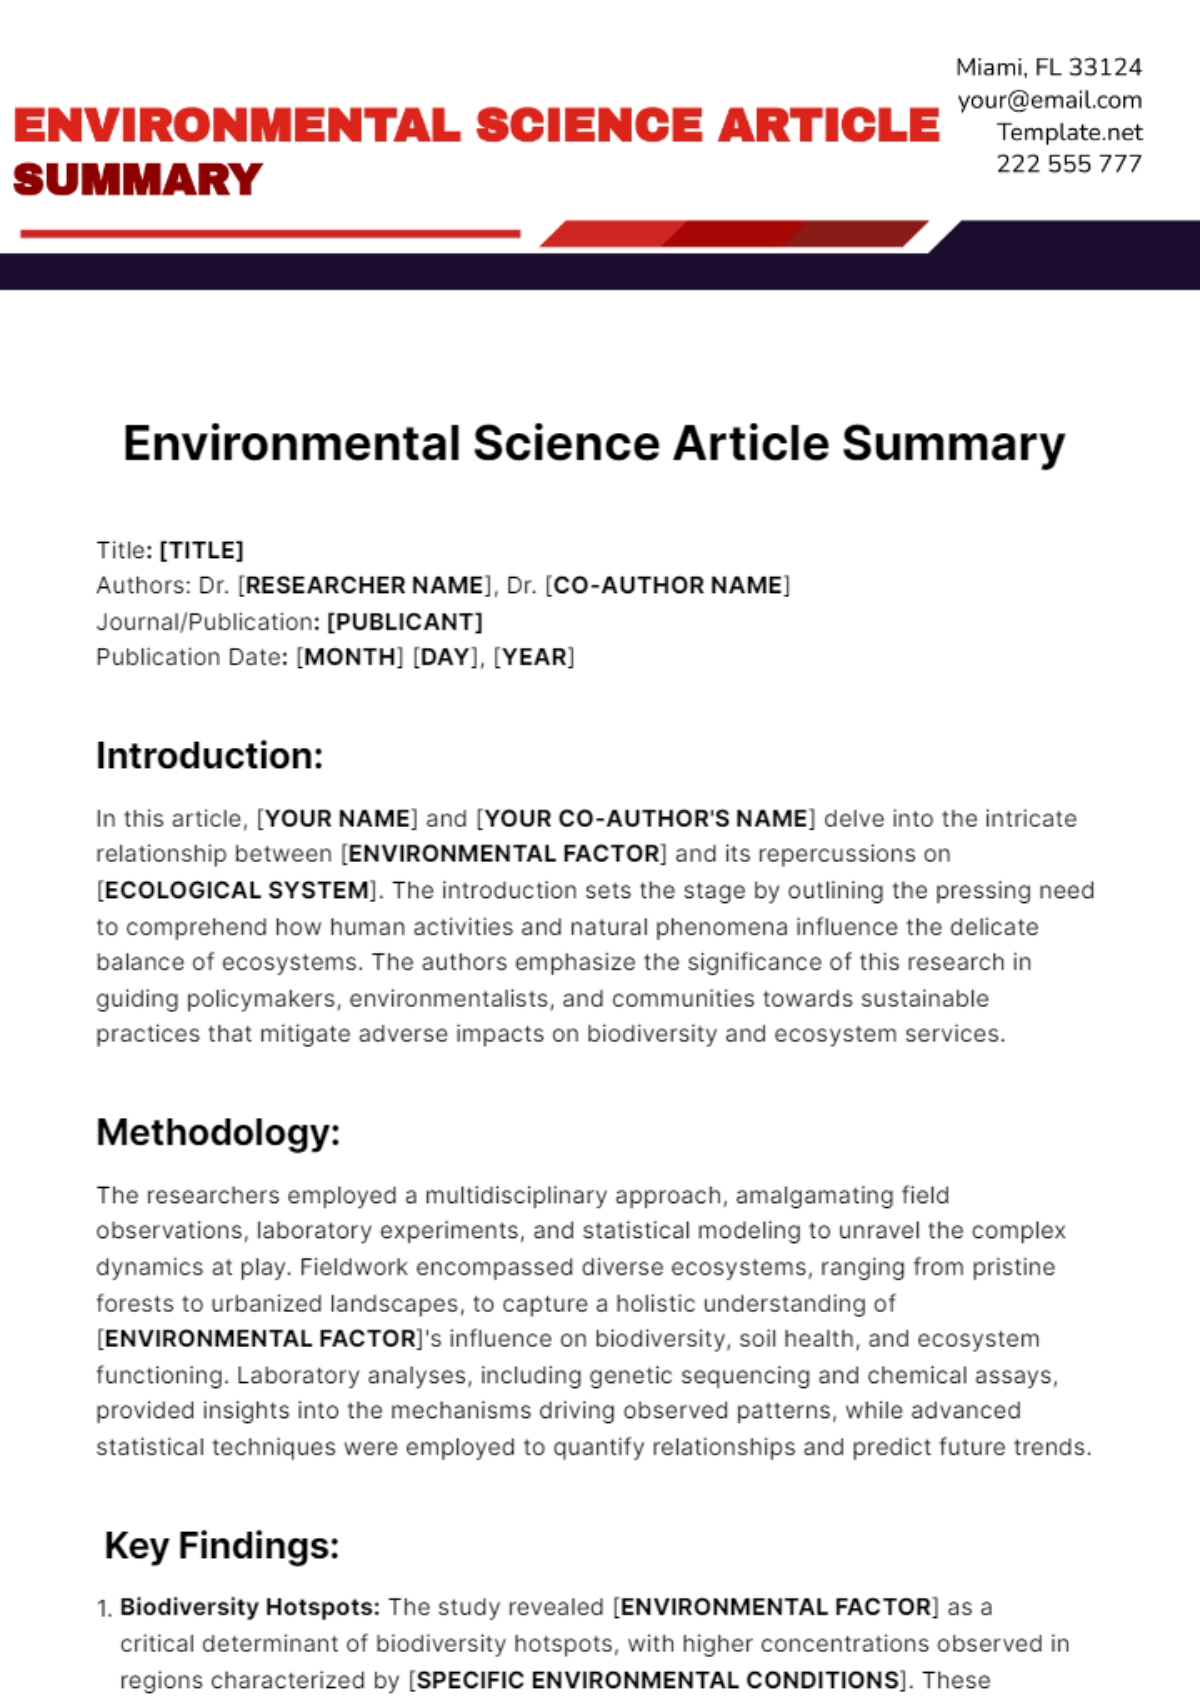 Environmental Science Article Summary Template